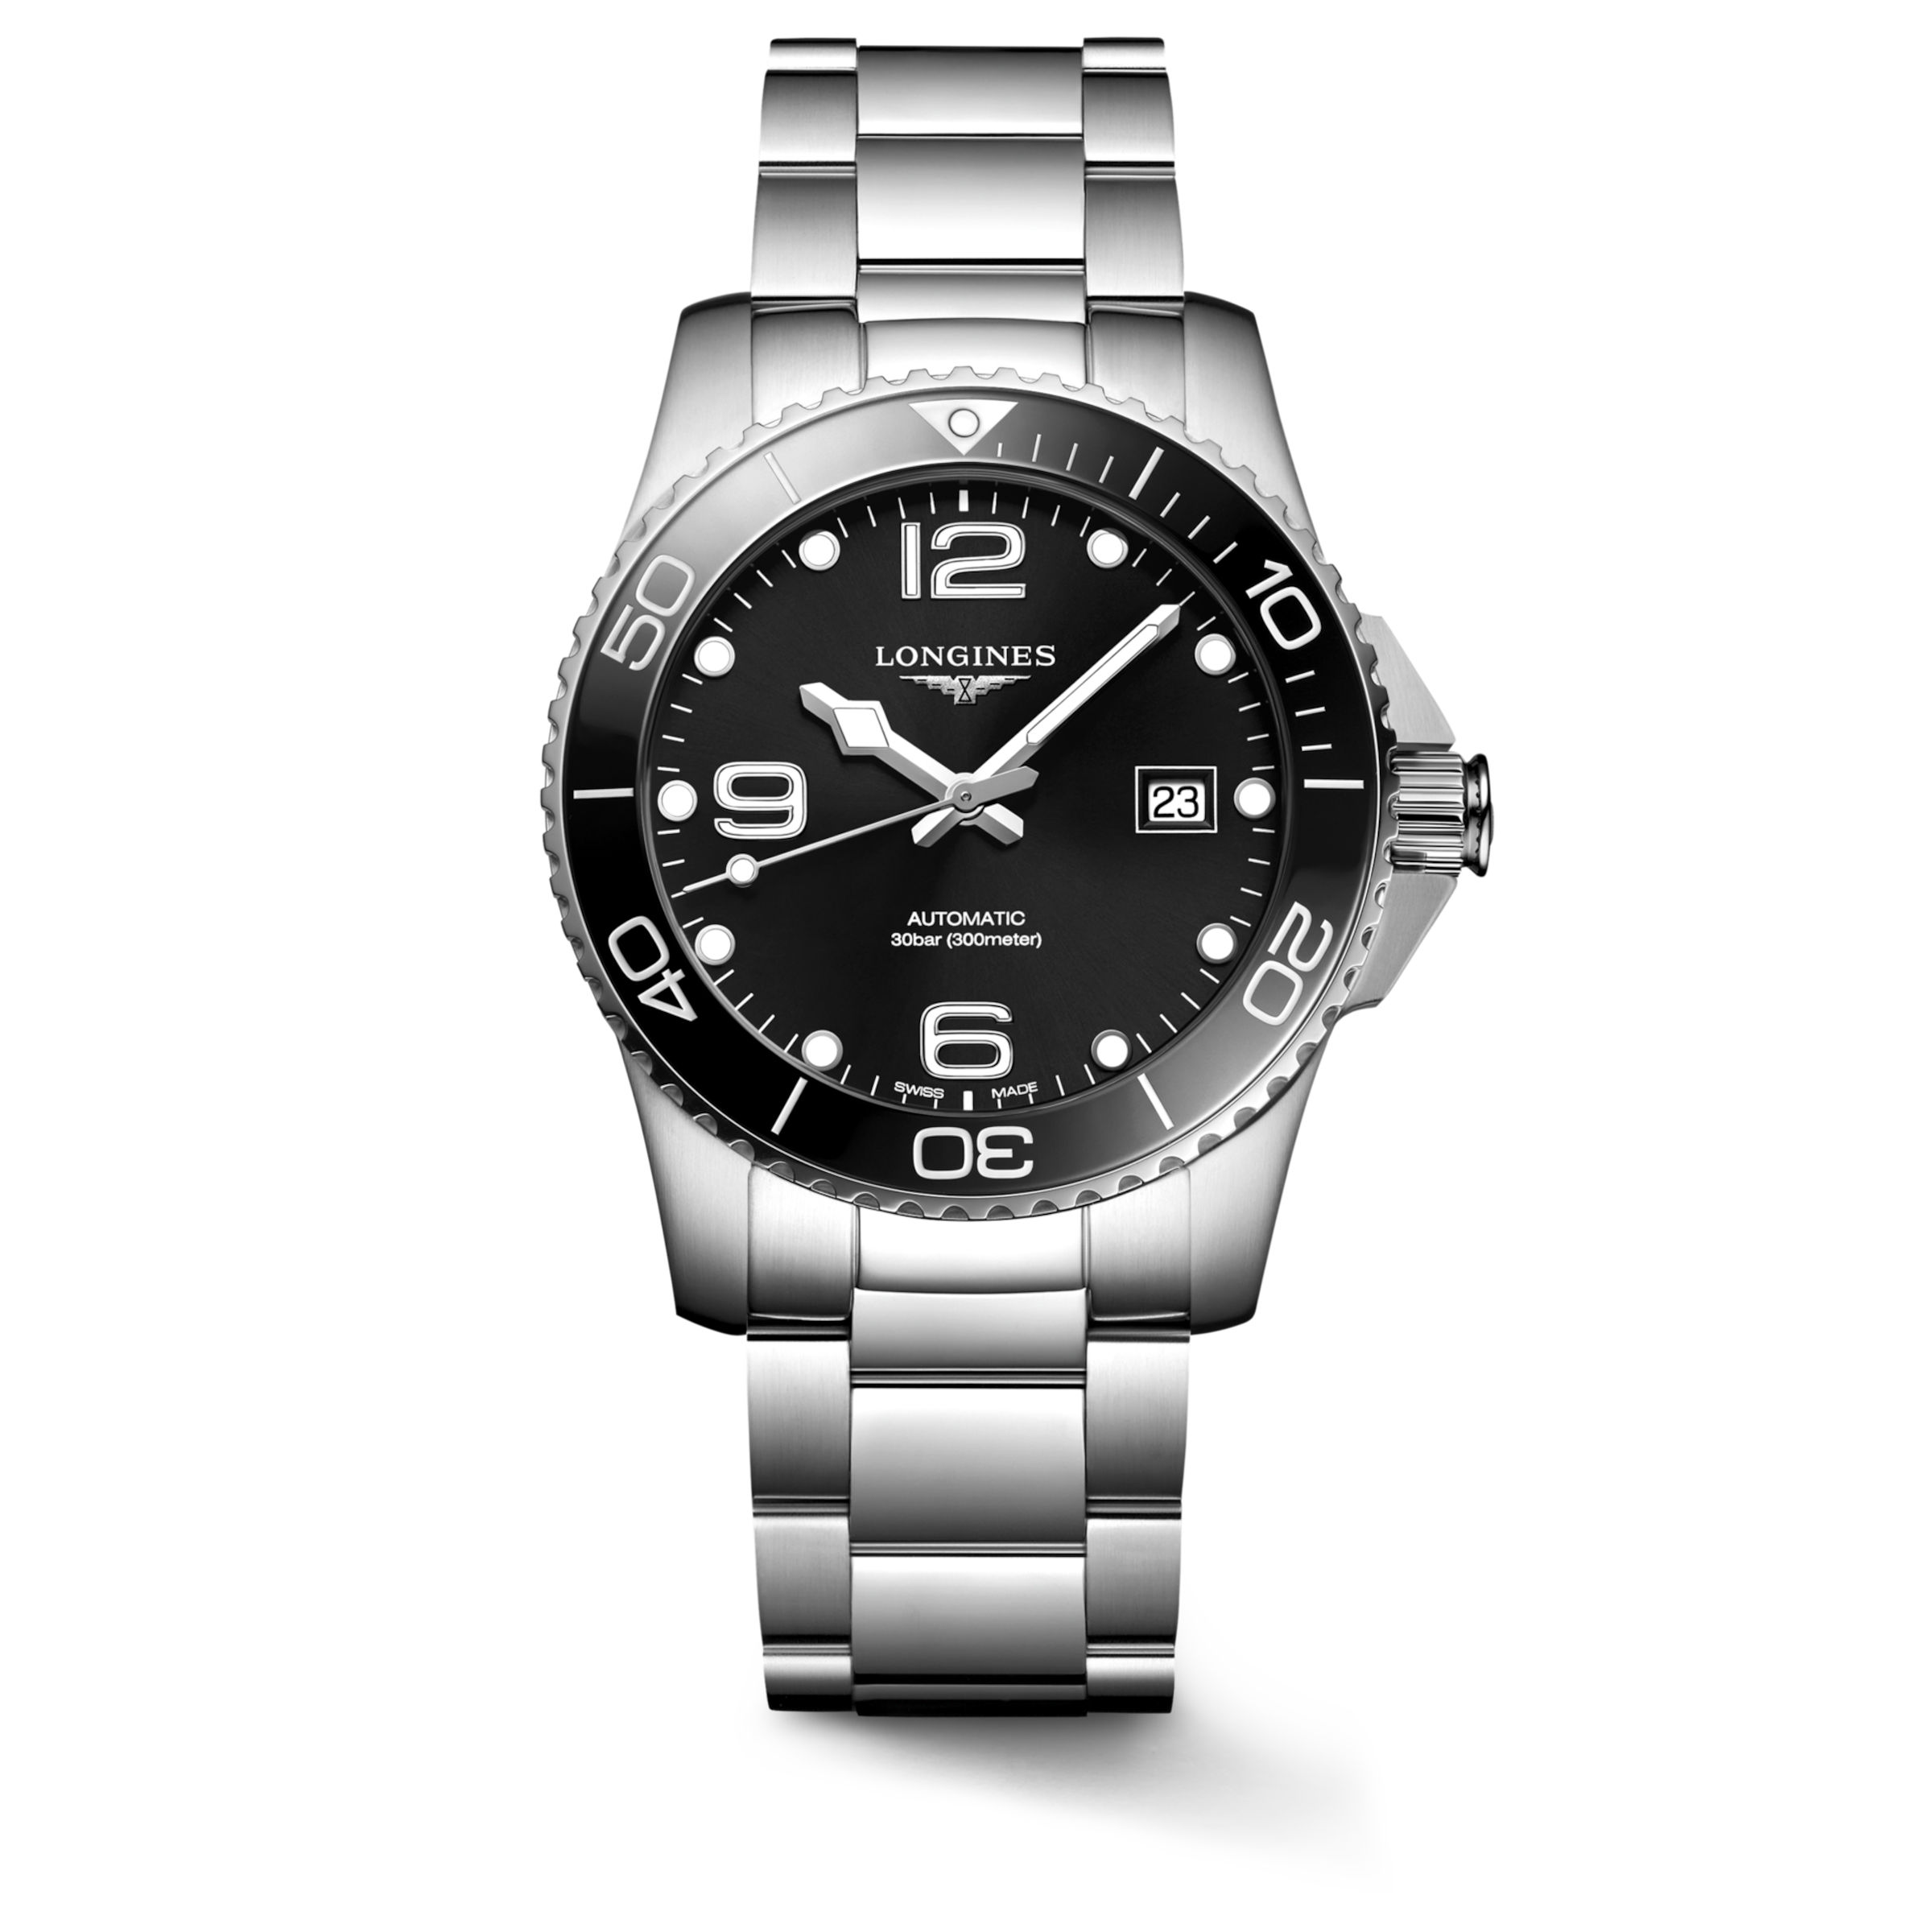 Longines HYDROCONQUEST Automatic Stainless steel and ceramic bezel Watch - L3.781.4.56.6